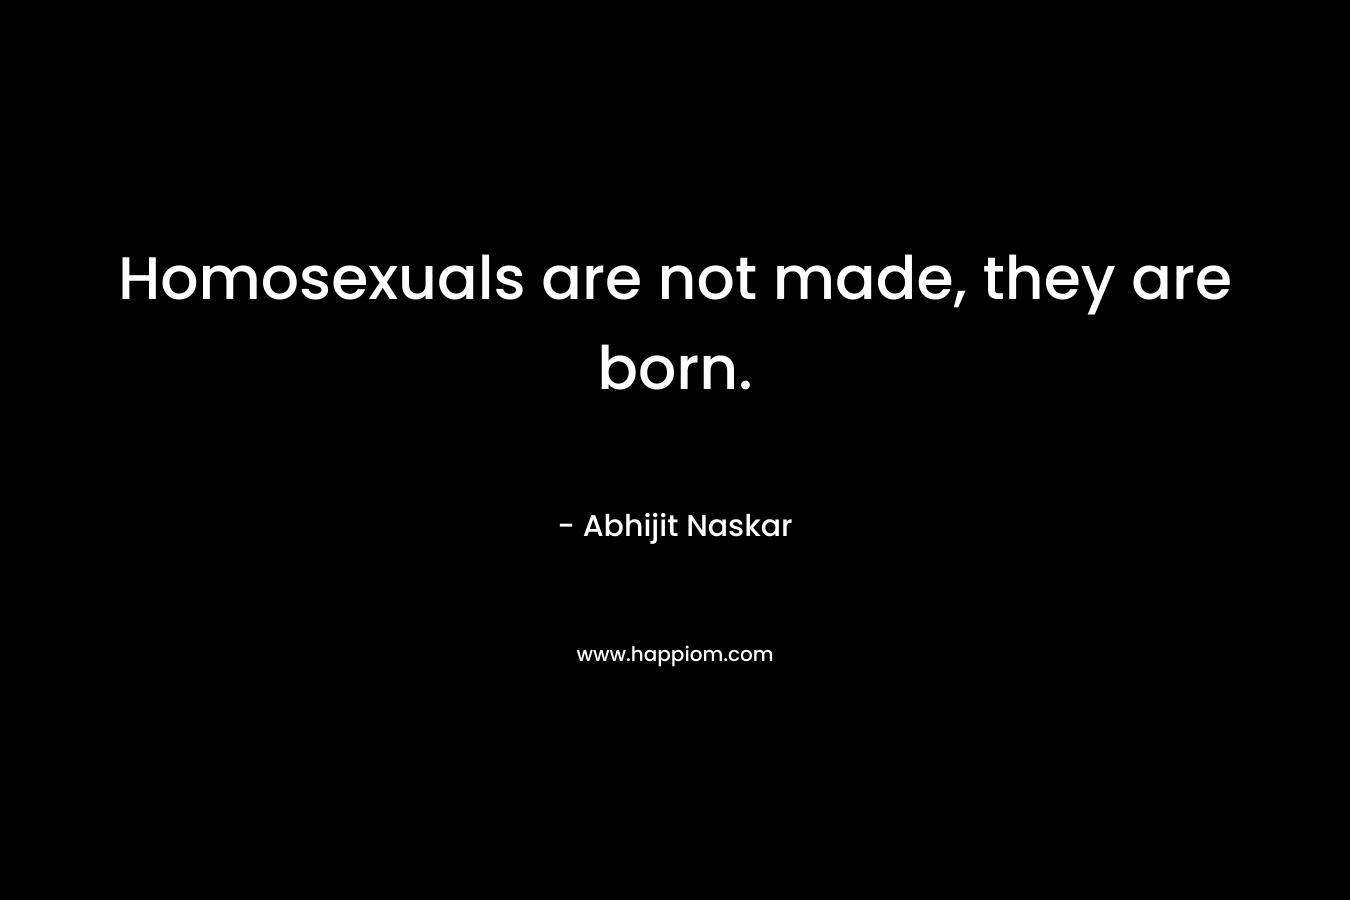 Homosexuals are not made, they are born.